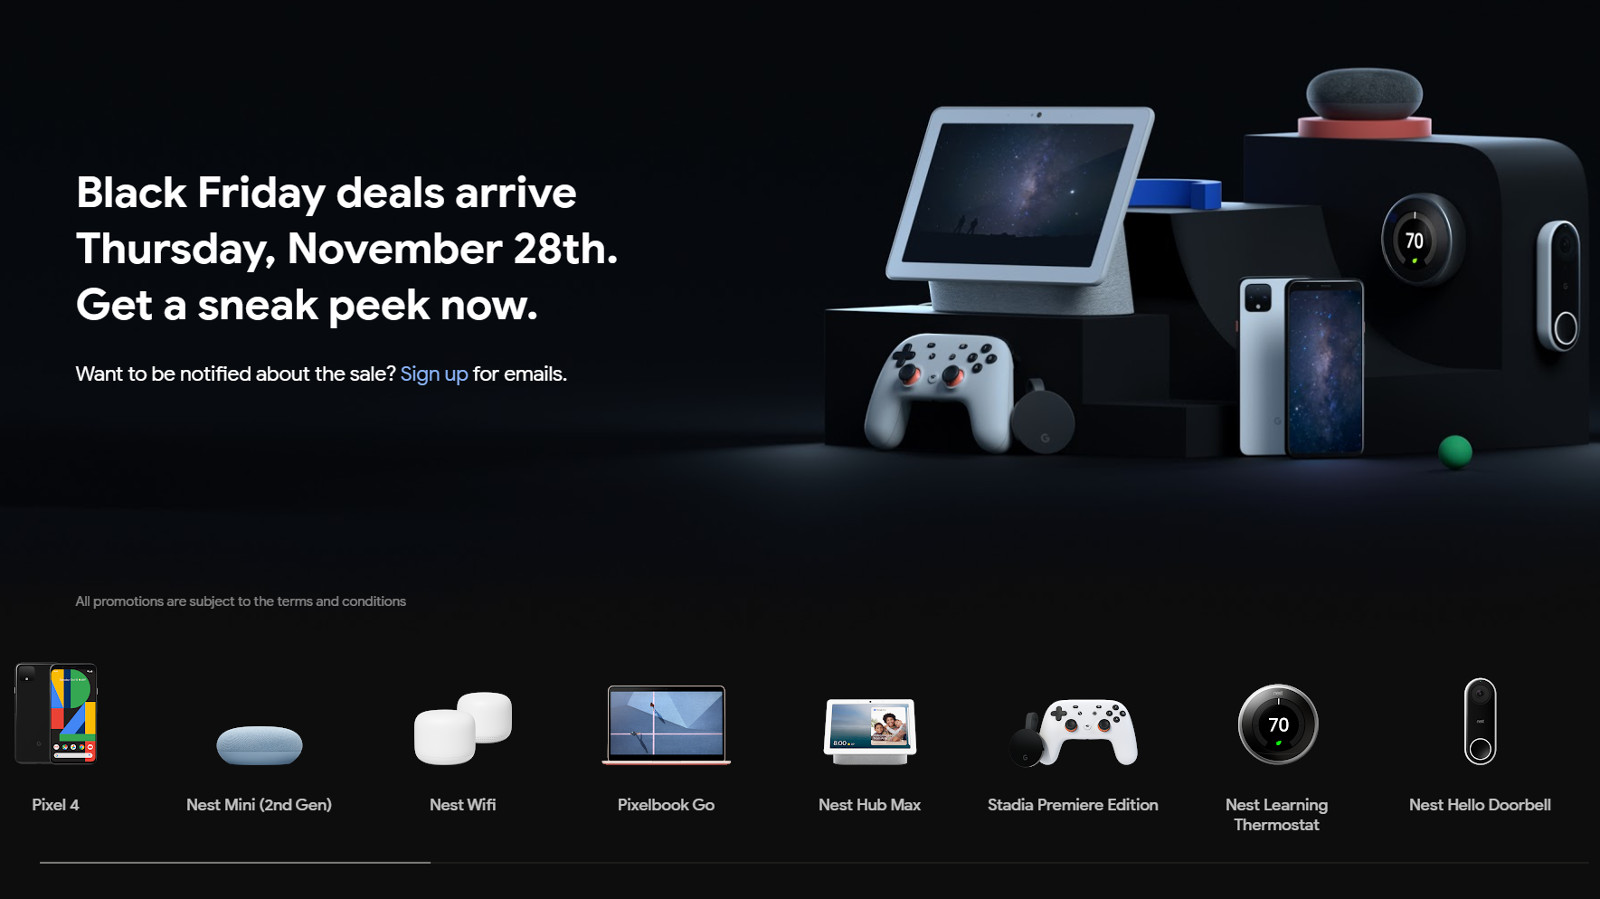 The Google Store Black Friday page.